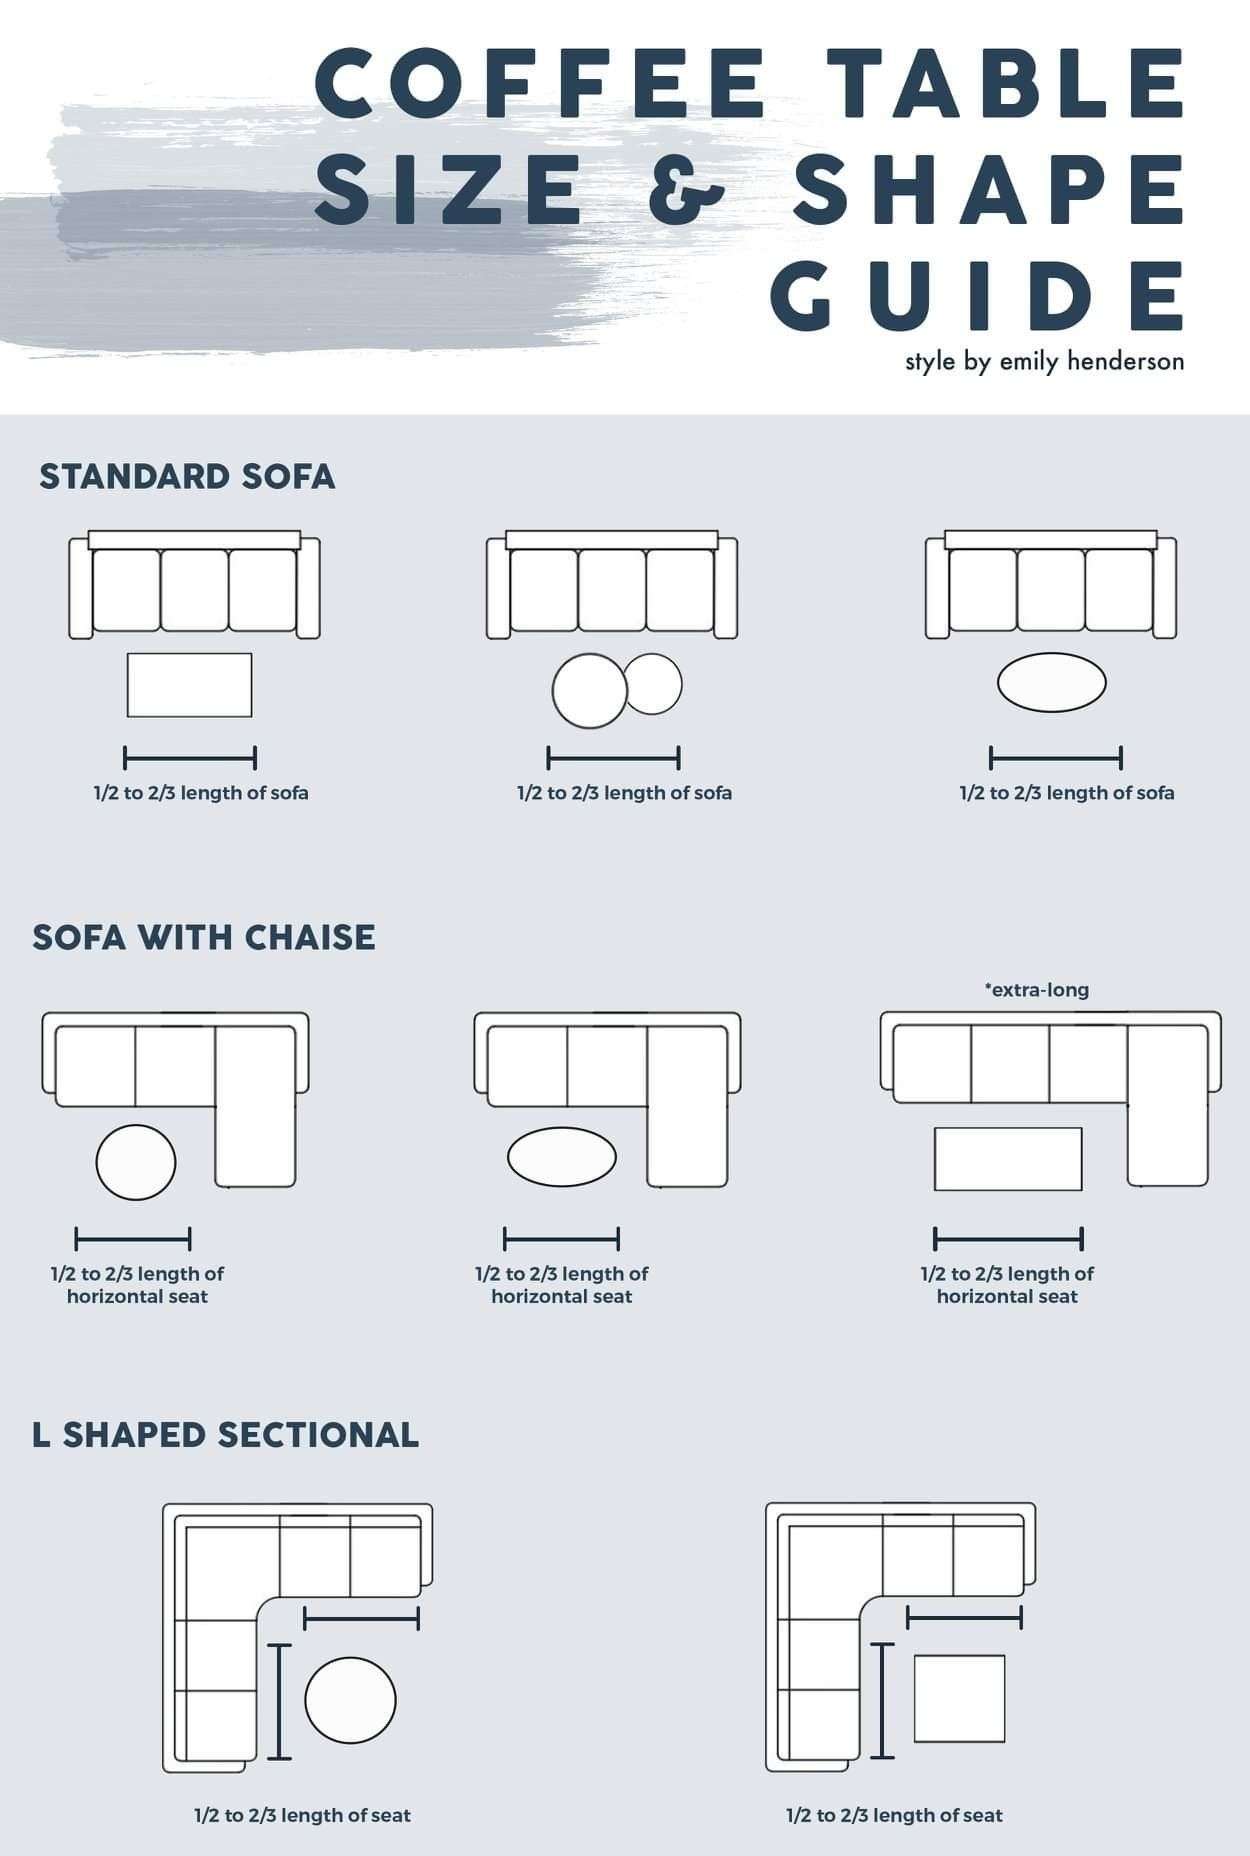 Coffee table size and shape guide